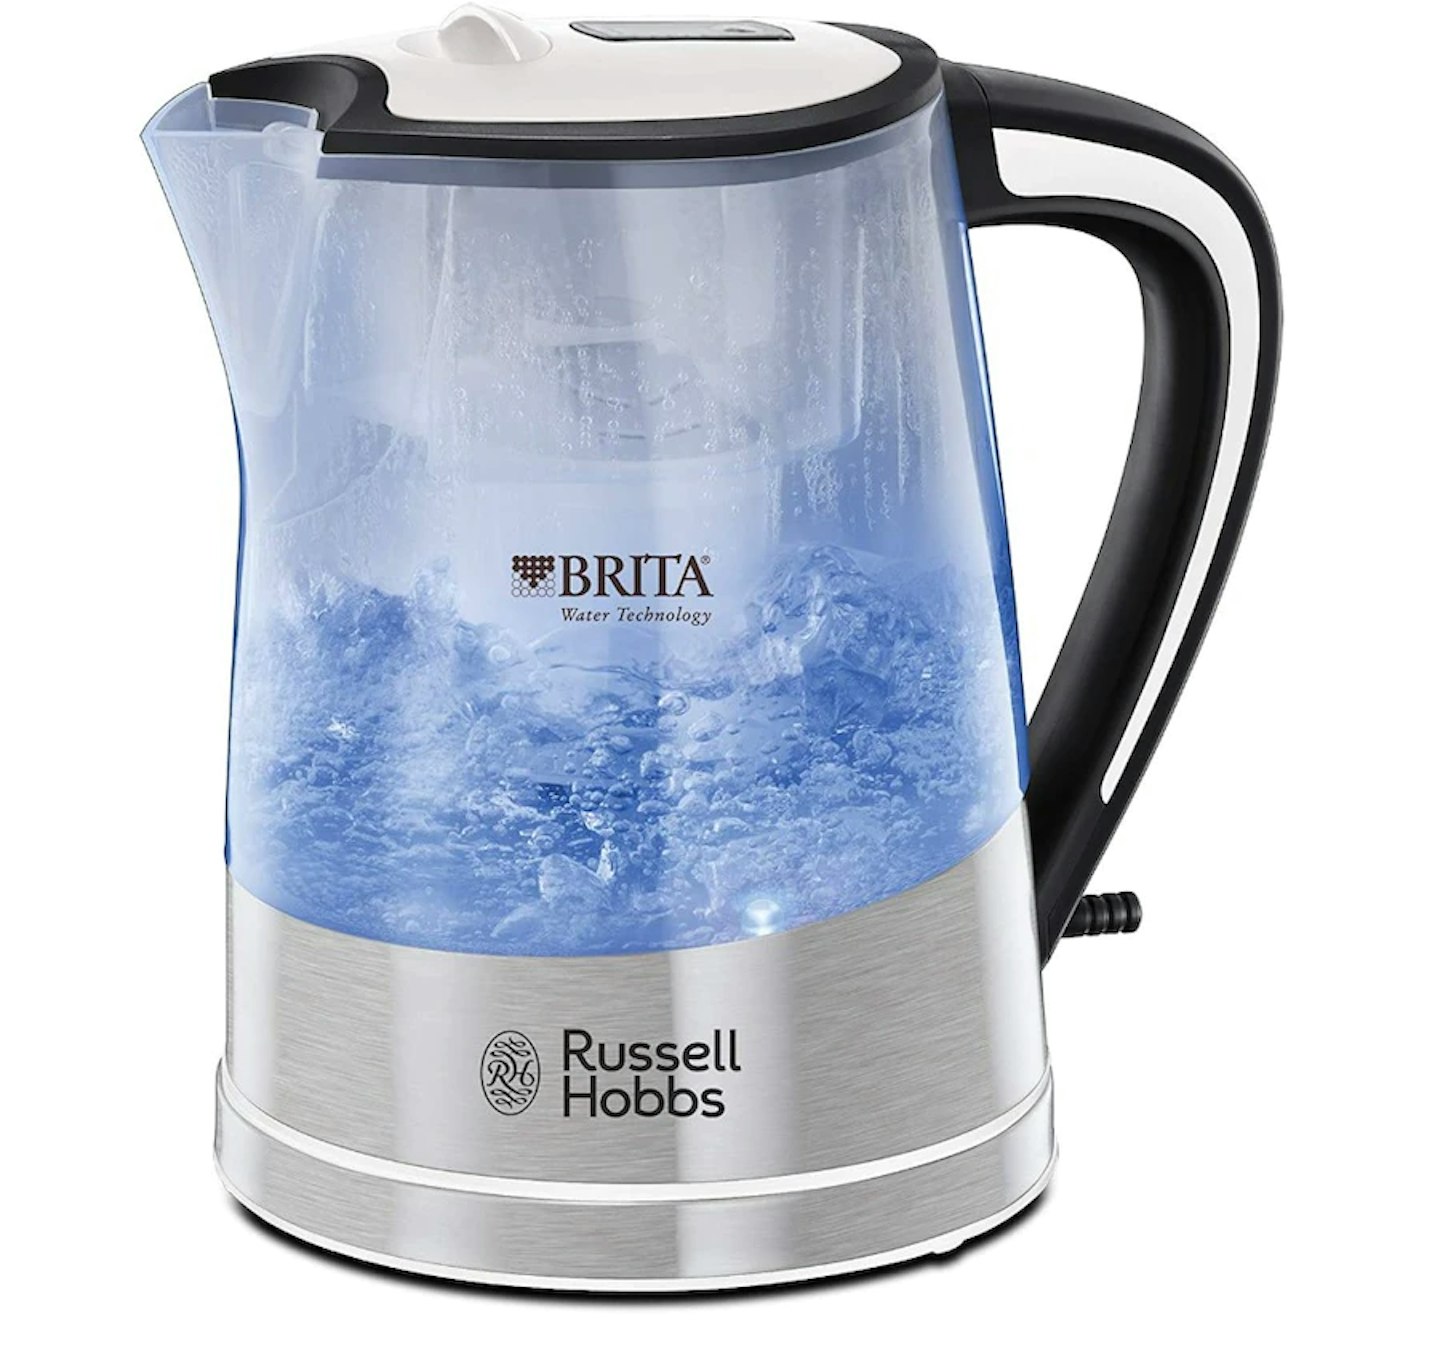 Russell Hobbs 22851 Brita Filter Purity Electric Kettle